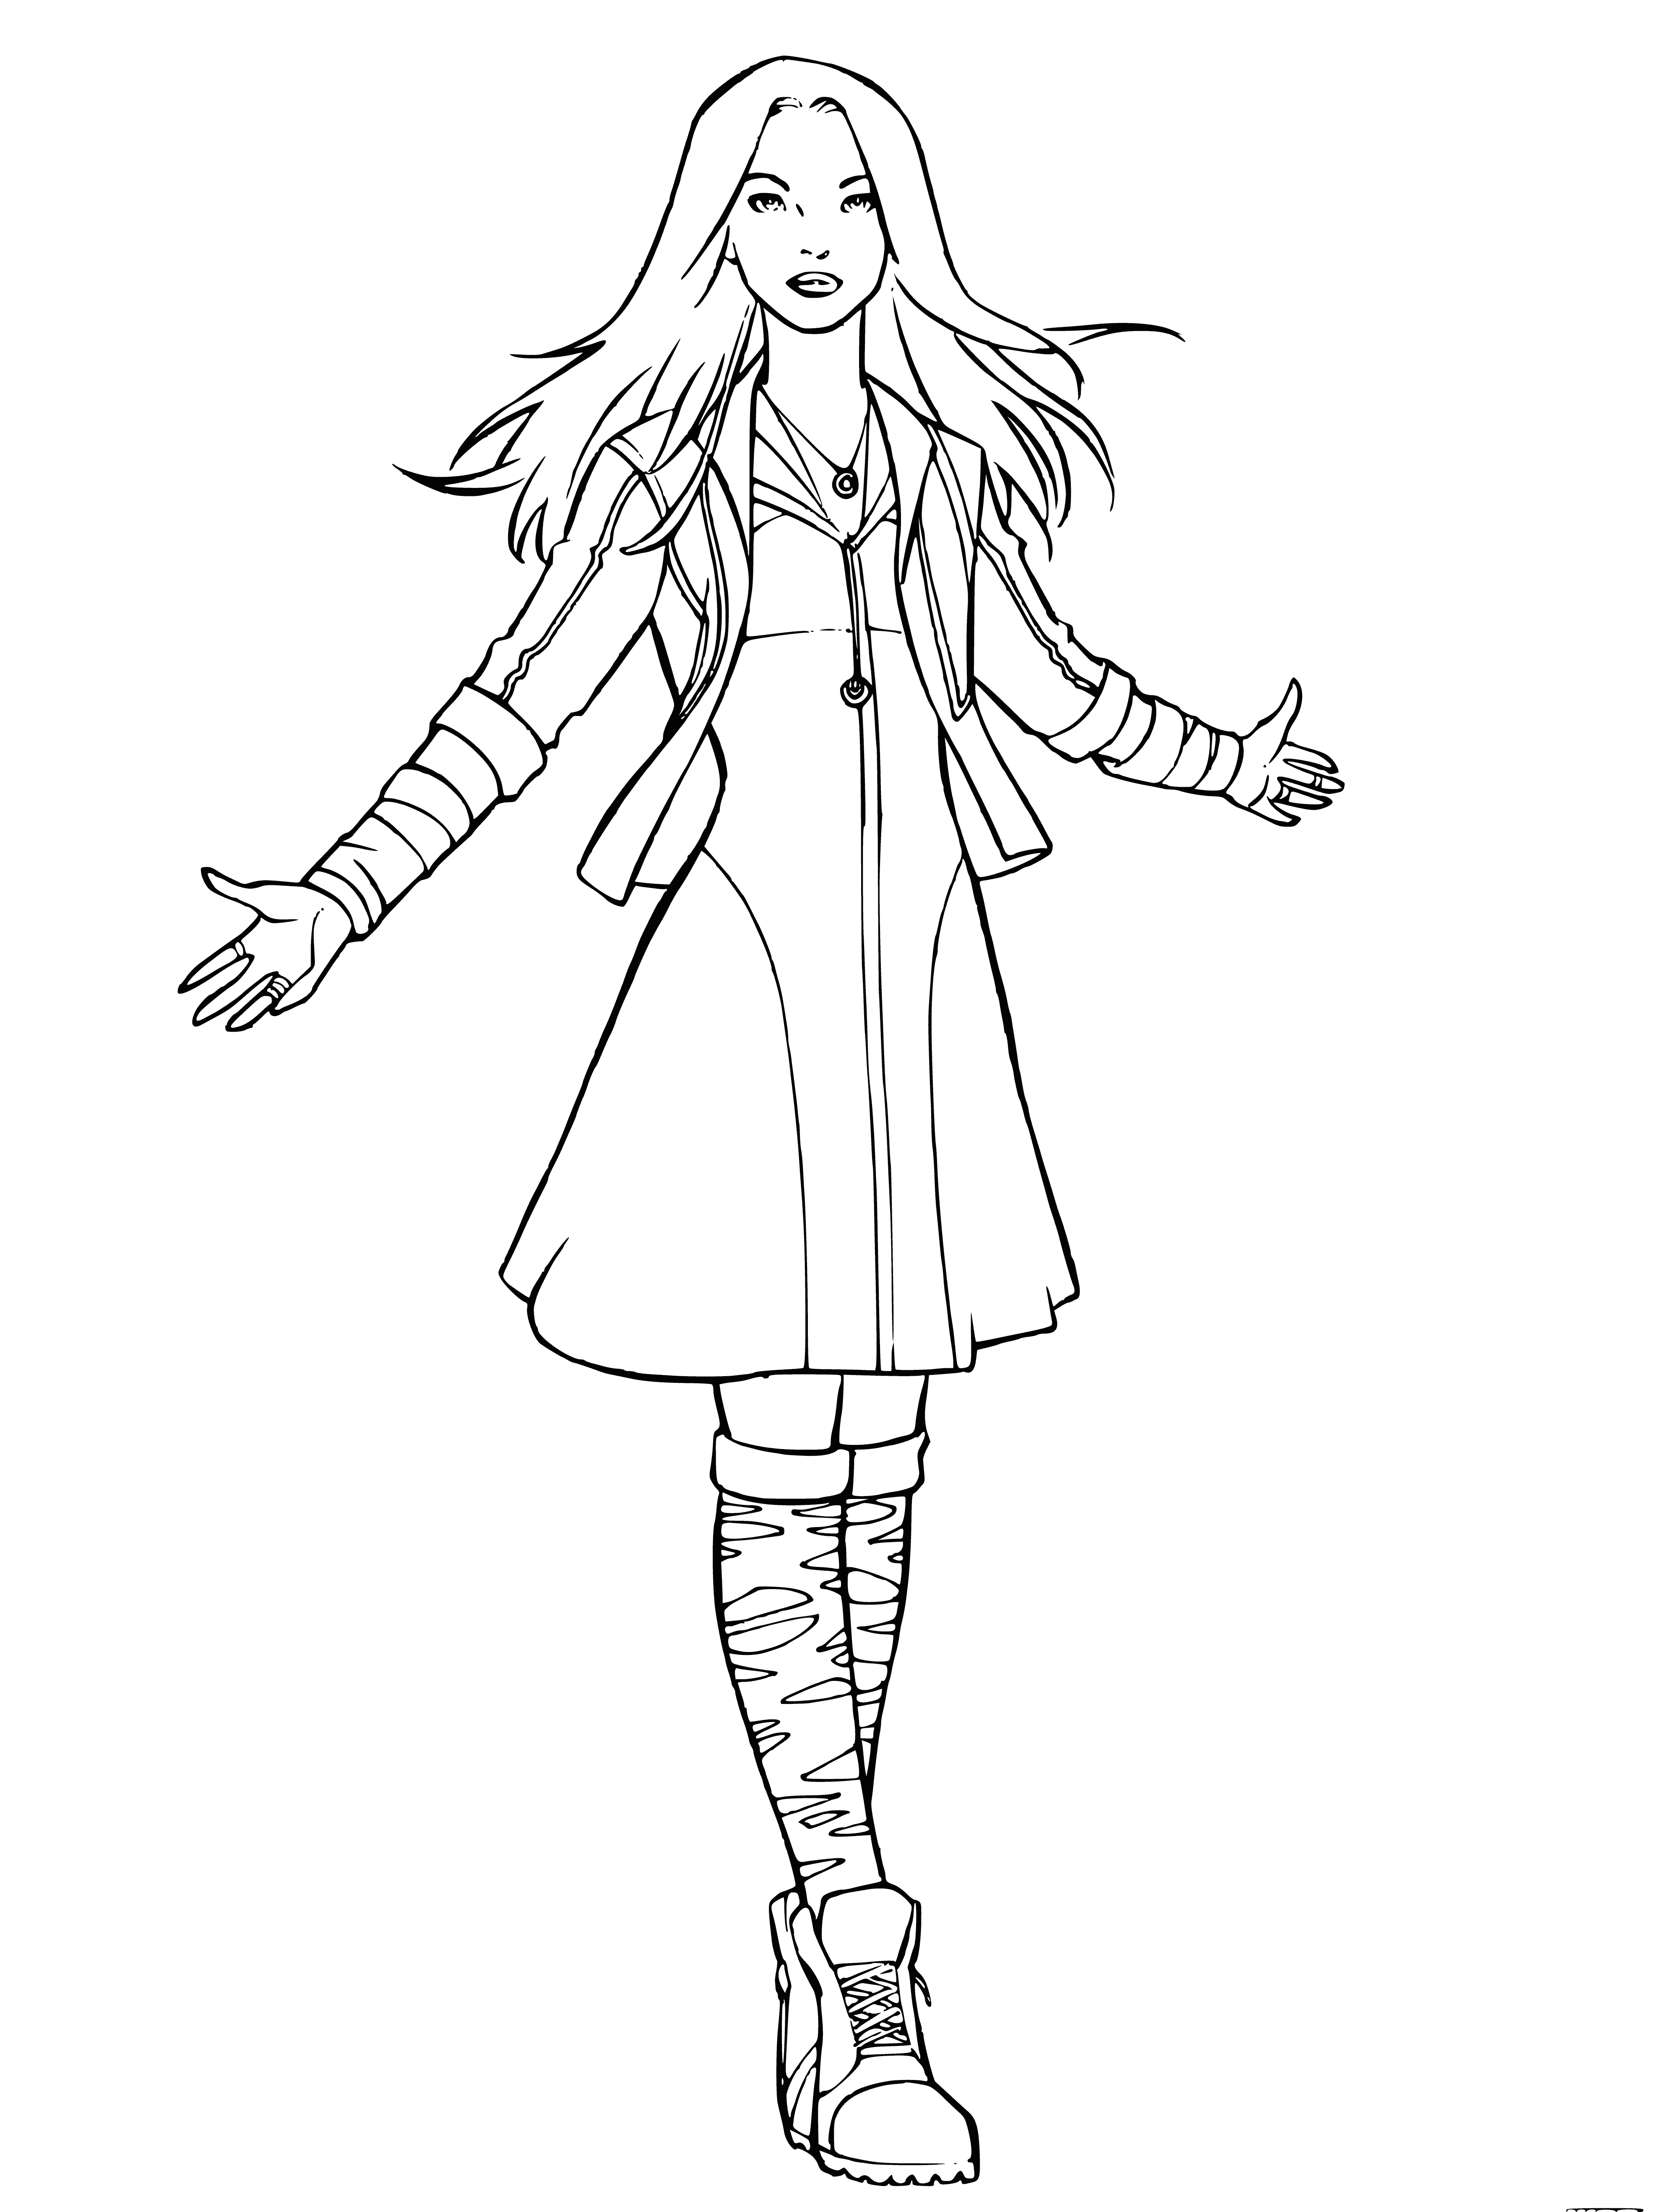 Scarlet witch coloring page